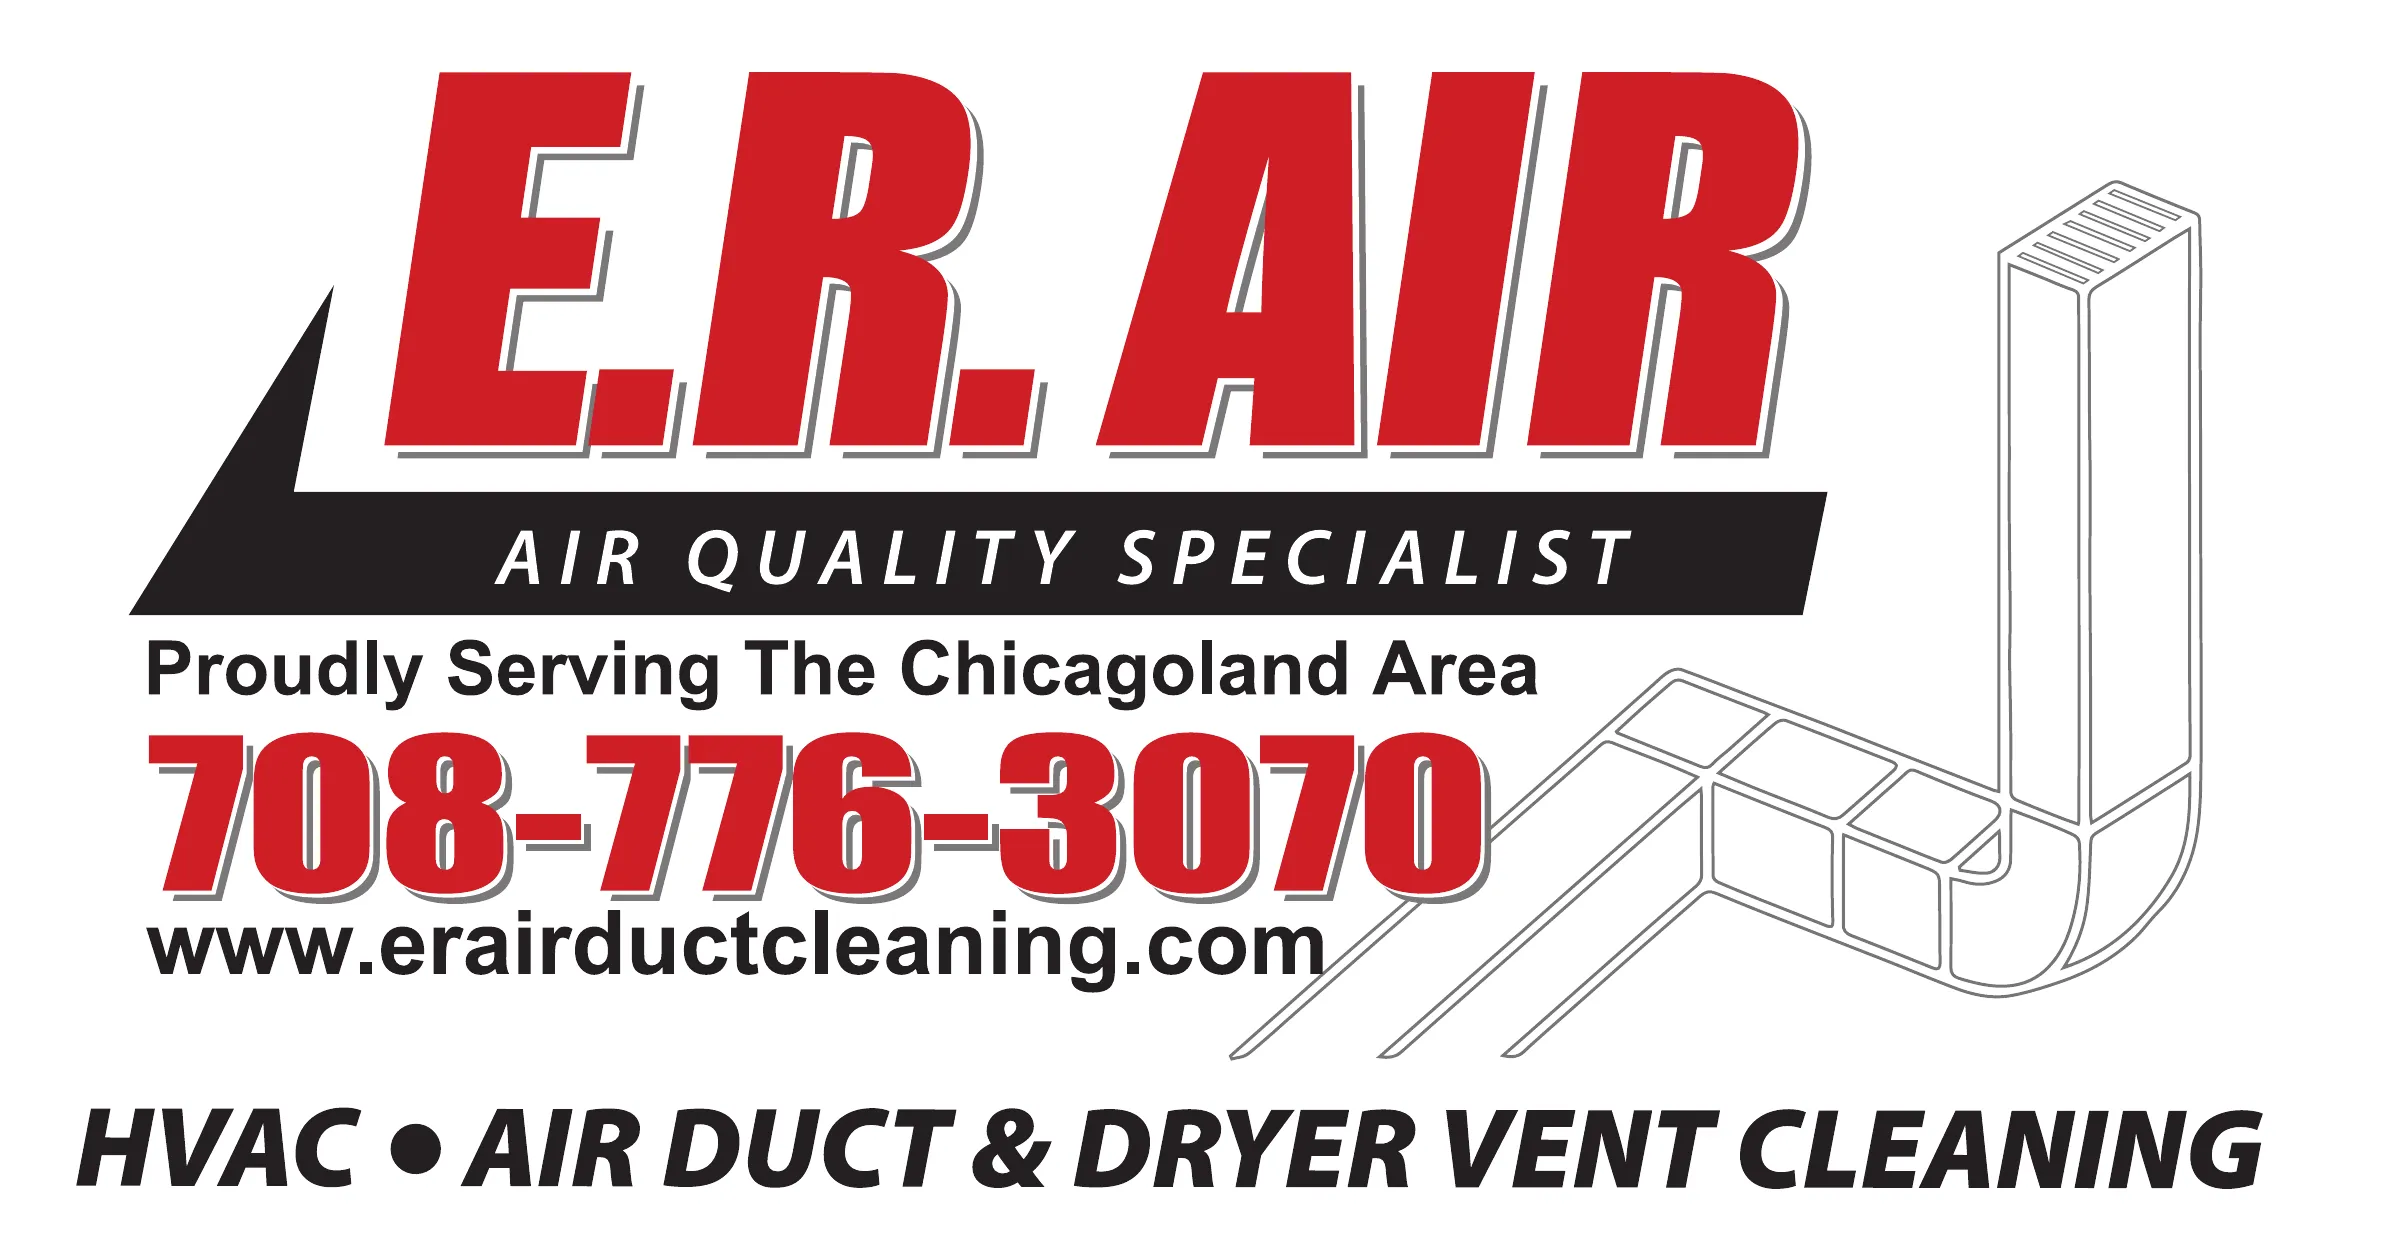 Does Duct Cleaning Actually Do Anything? Some Before and After Photo Examples